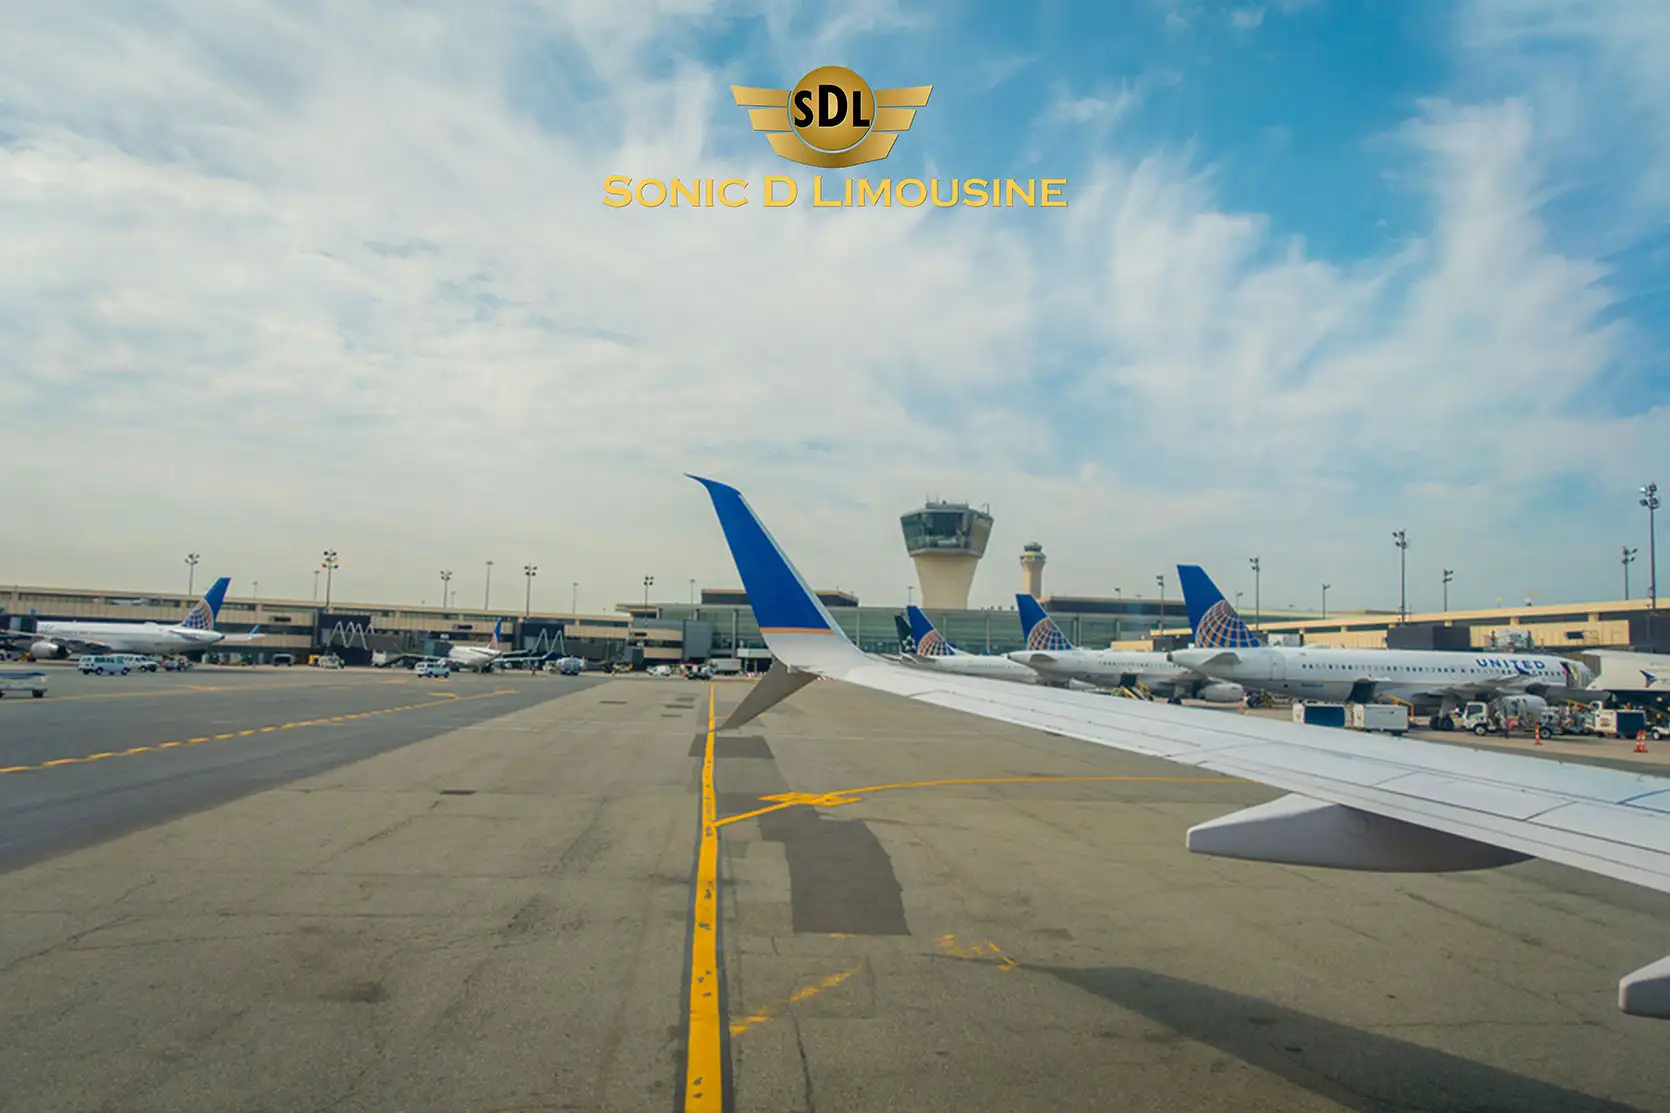 Sonic D Limousine An airplane parked on the tarmac at an airport.